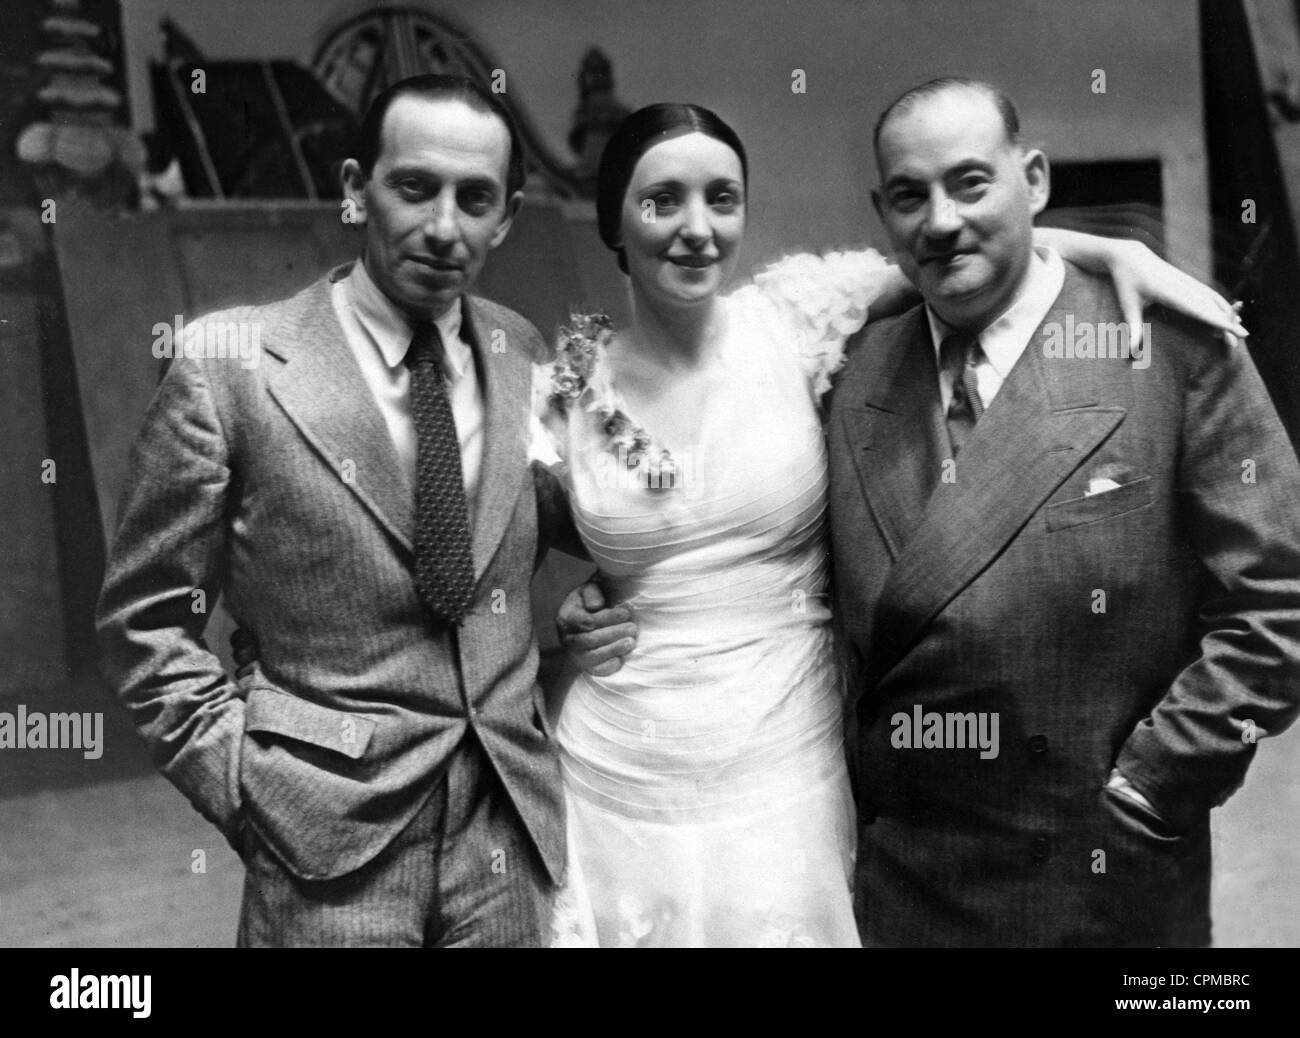 Paul Abraham, Anny Ahlers and Paul Rotter, 1936 Stock Photo - Alamy